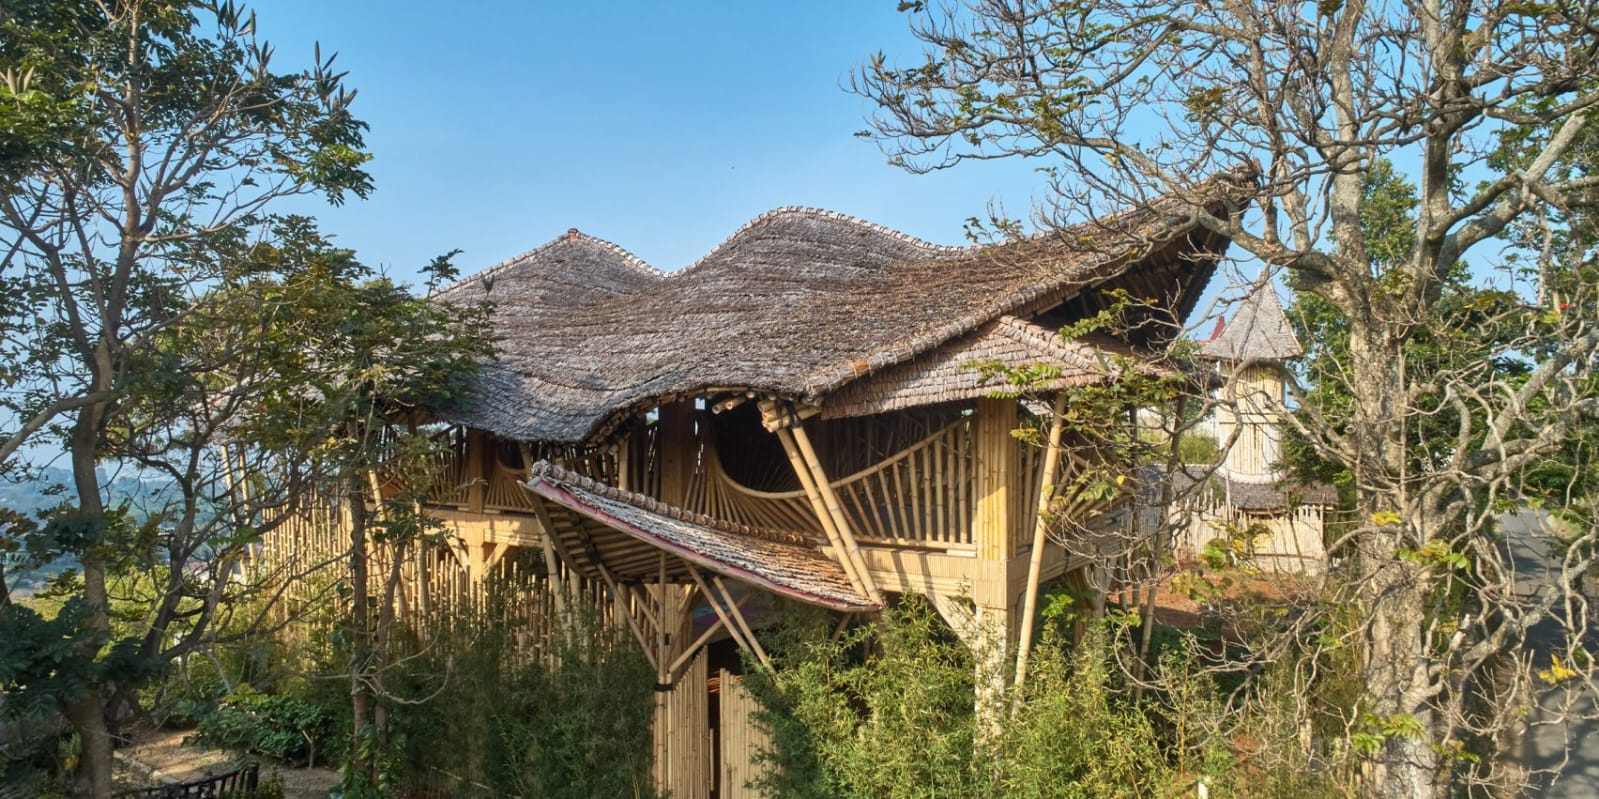 Bamboo home and community center, Indonesia, by RAW Architecture